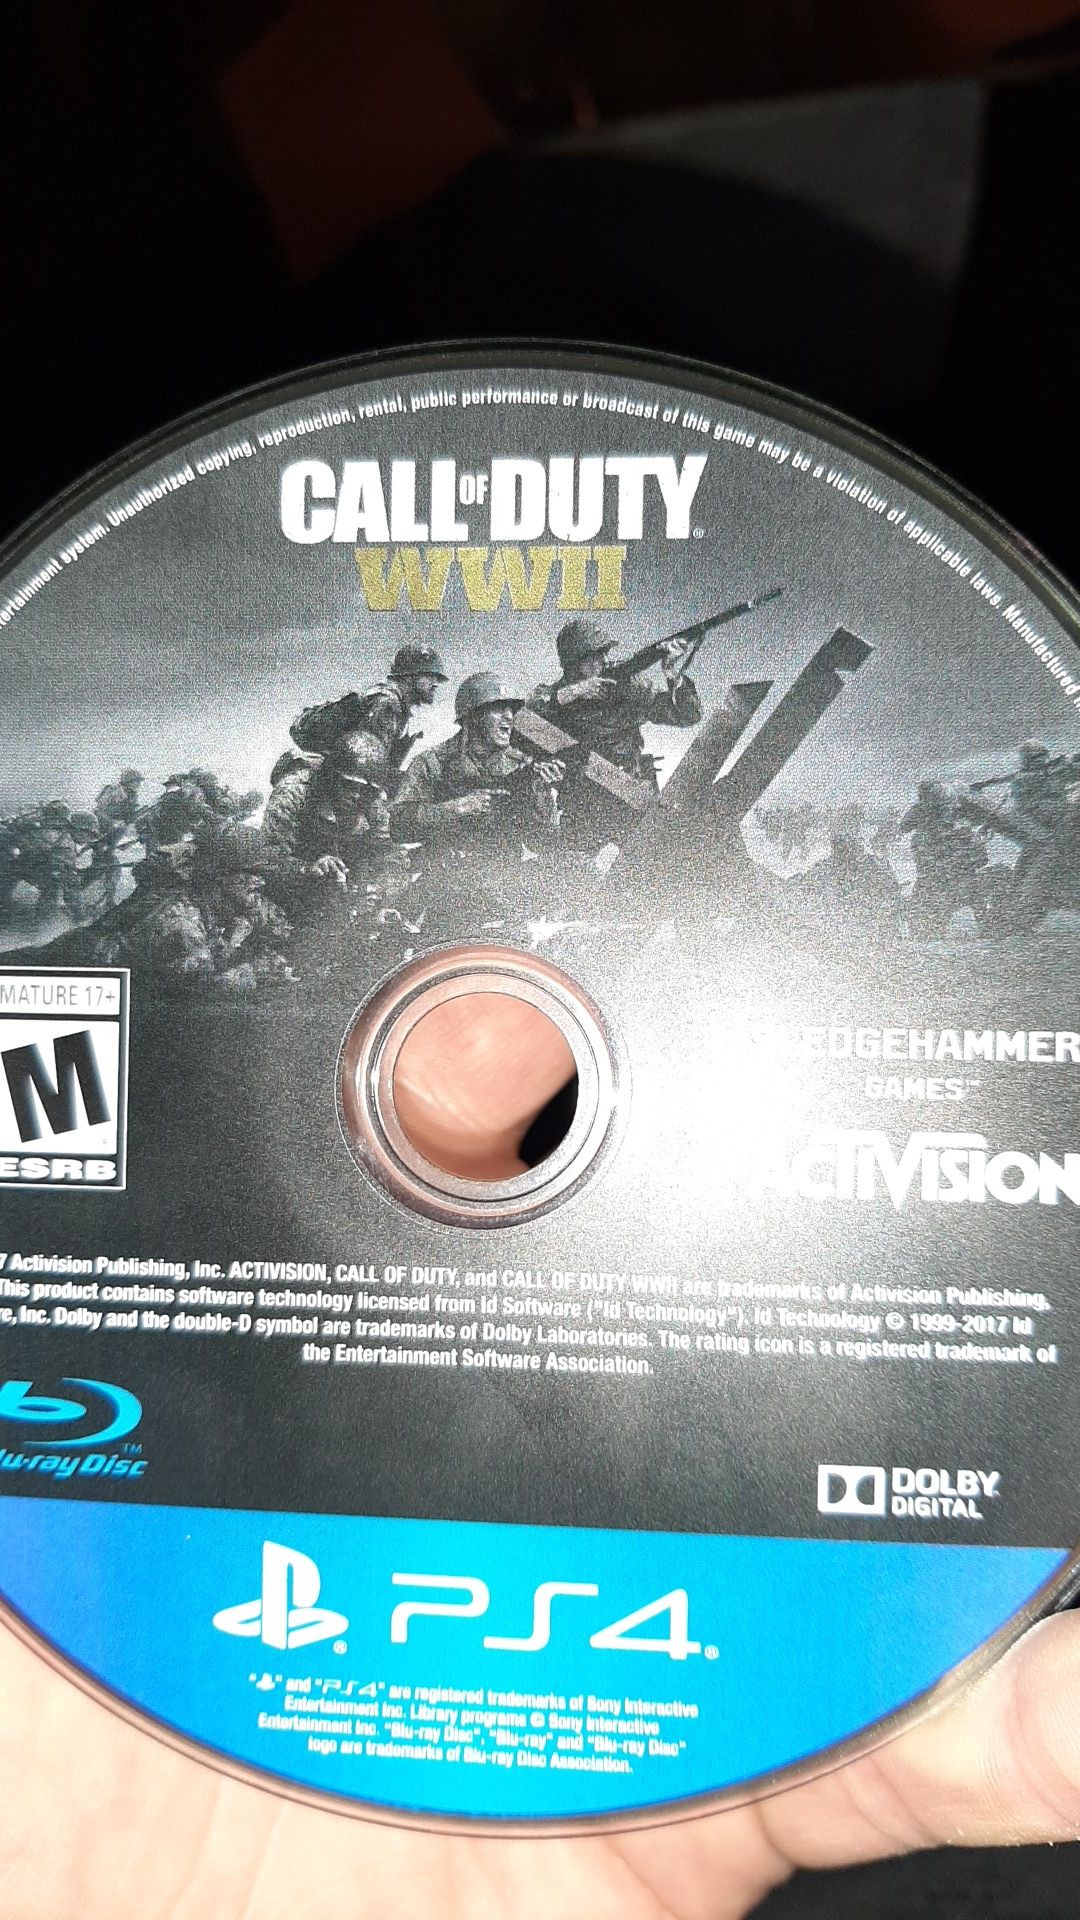 Call of duty WWII (DISC ONLY)